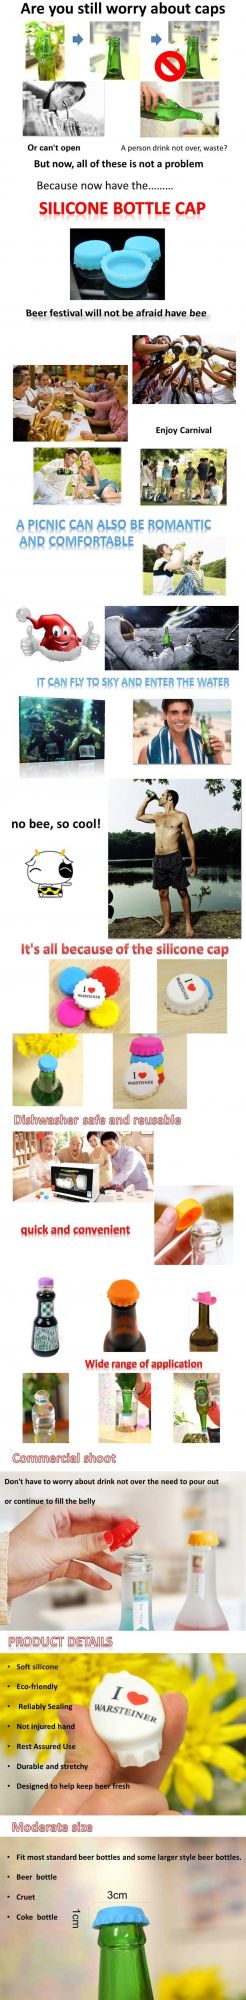 Custom Cheap Colorful Silicone Beer Bottle Caps with Printing Logo